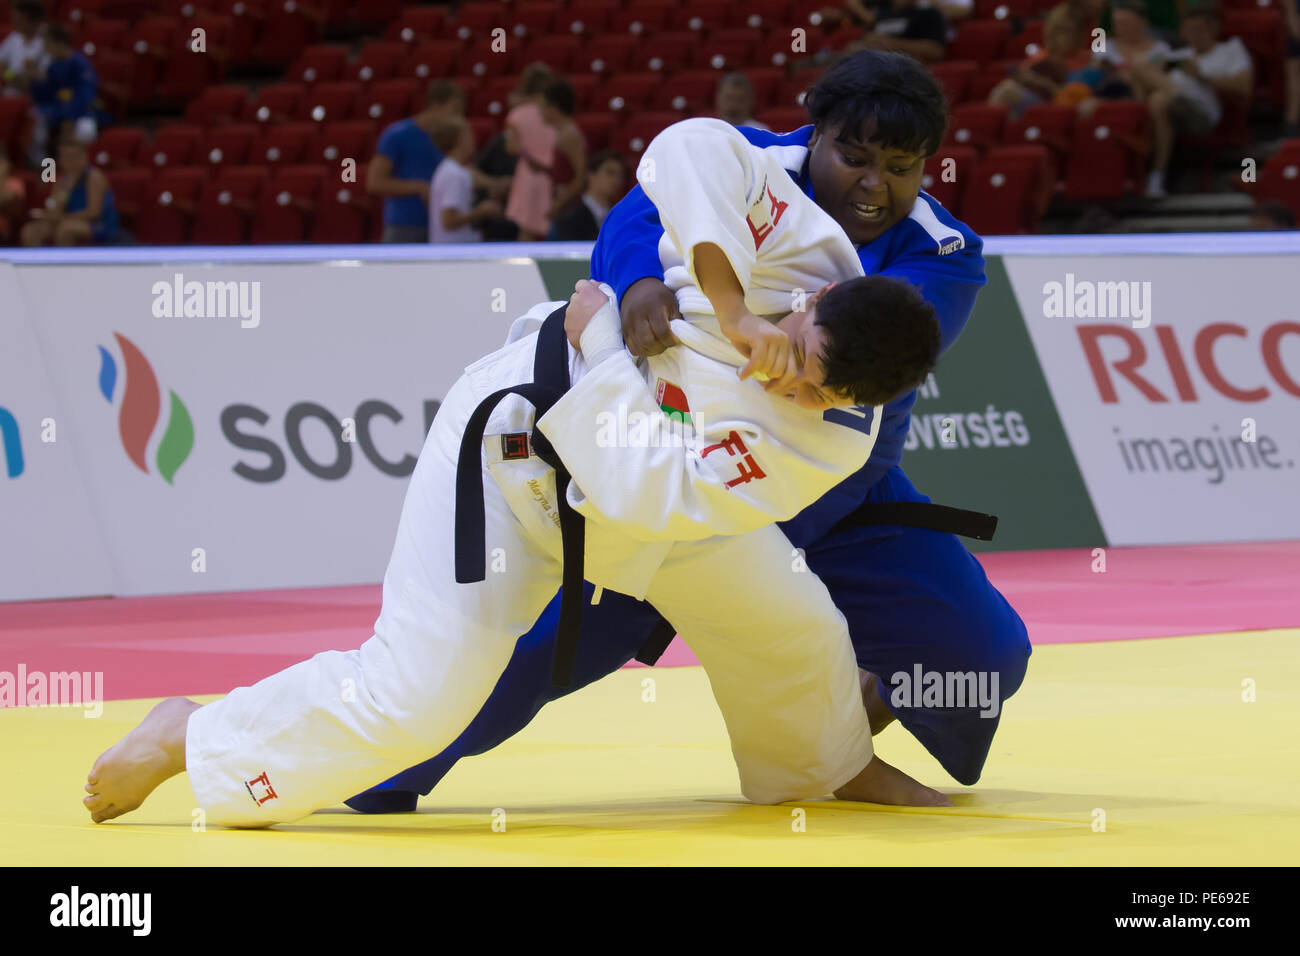 Budapest. 12th Aug, 2018. Idalys Ortiz (Back) of Cuba and Maryna Slutskaya of Belarus fight during the final of Women's  78kg category at the Judo World Grand Prix 2018 in Budapest, Hungary on Aug. 12, 2018. Idalys Ortiz won the gold medal. Credit: Attila Volgyi/Xinhua/Alamy Live News Stock Photo